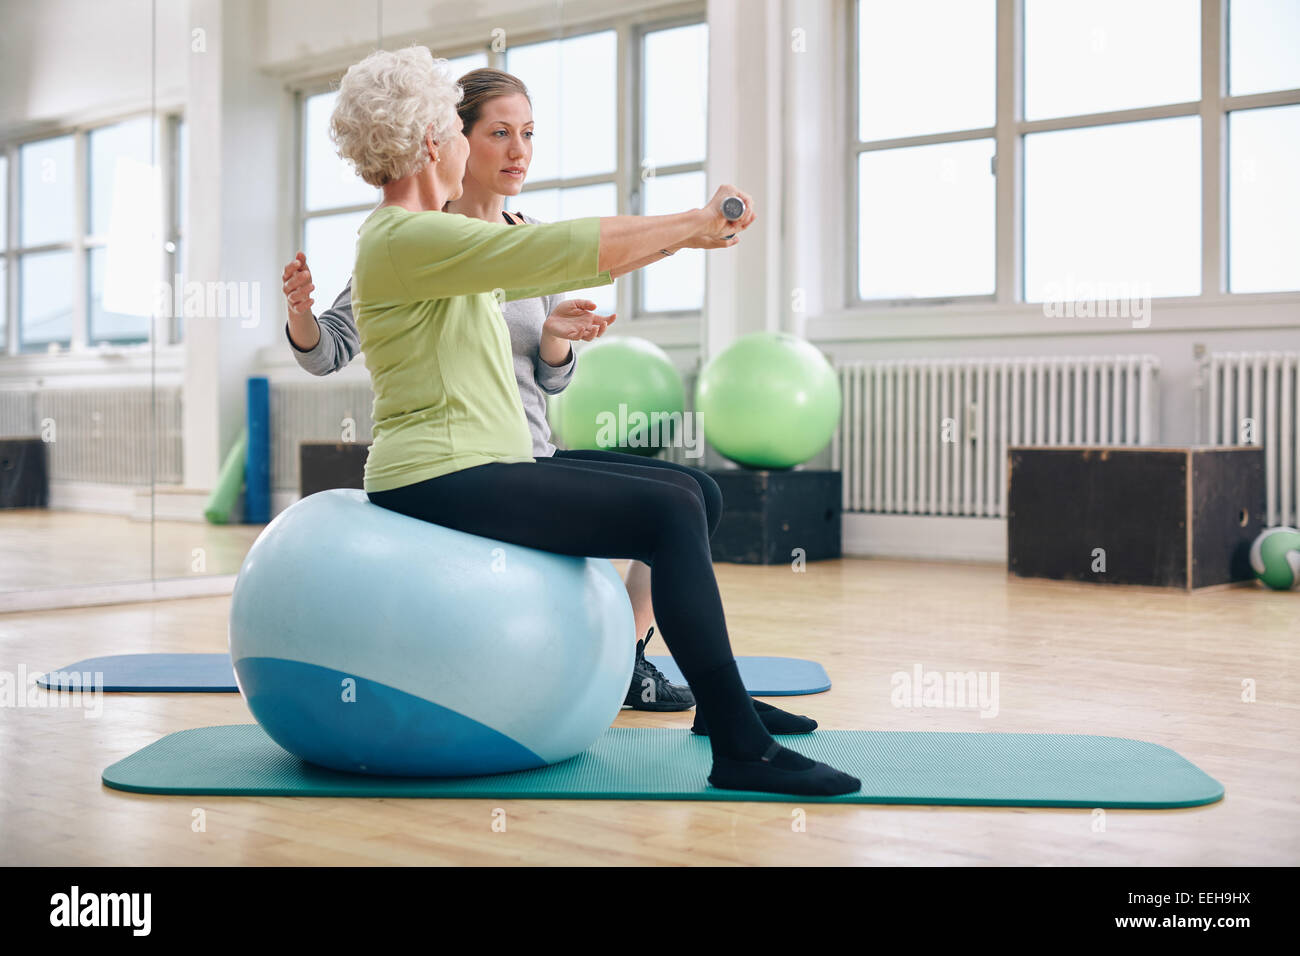 Female trainer assisting senior woman lifting weights in gym. Senior woman sitting on pilates ball doing weight exercise. Stock Photo